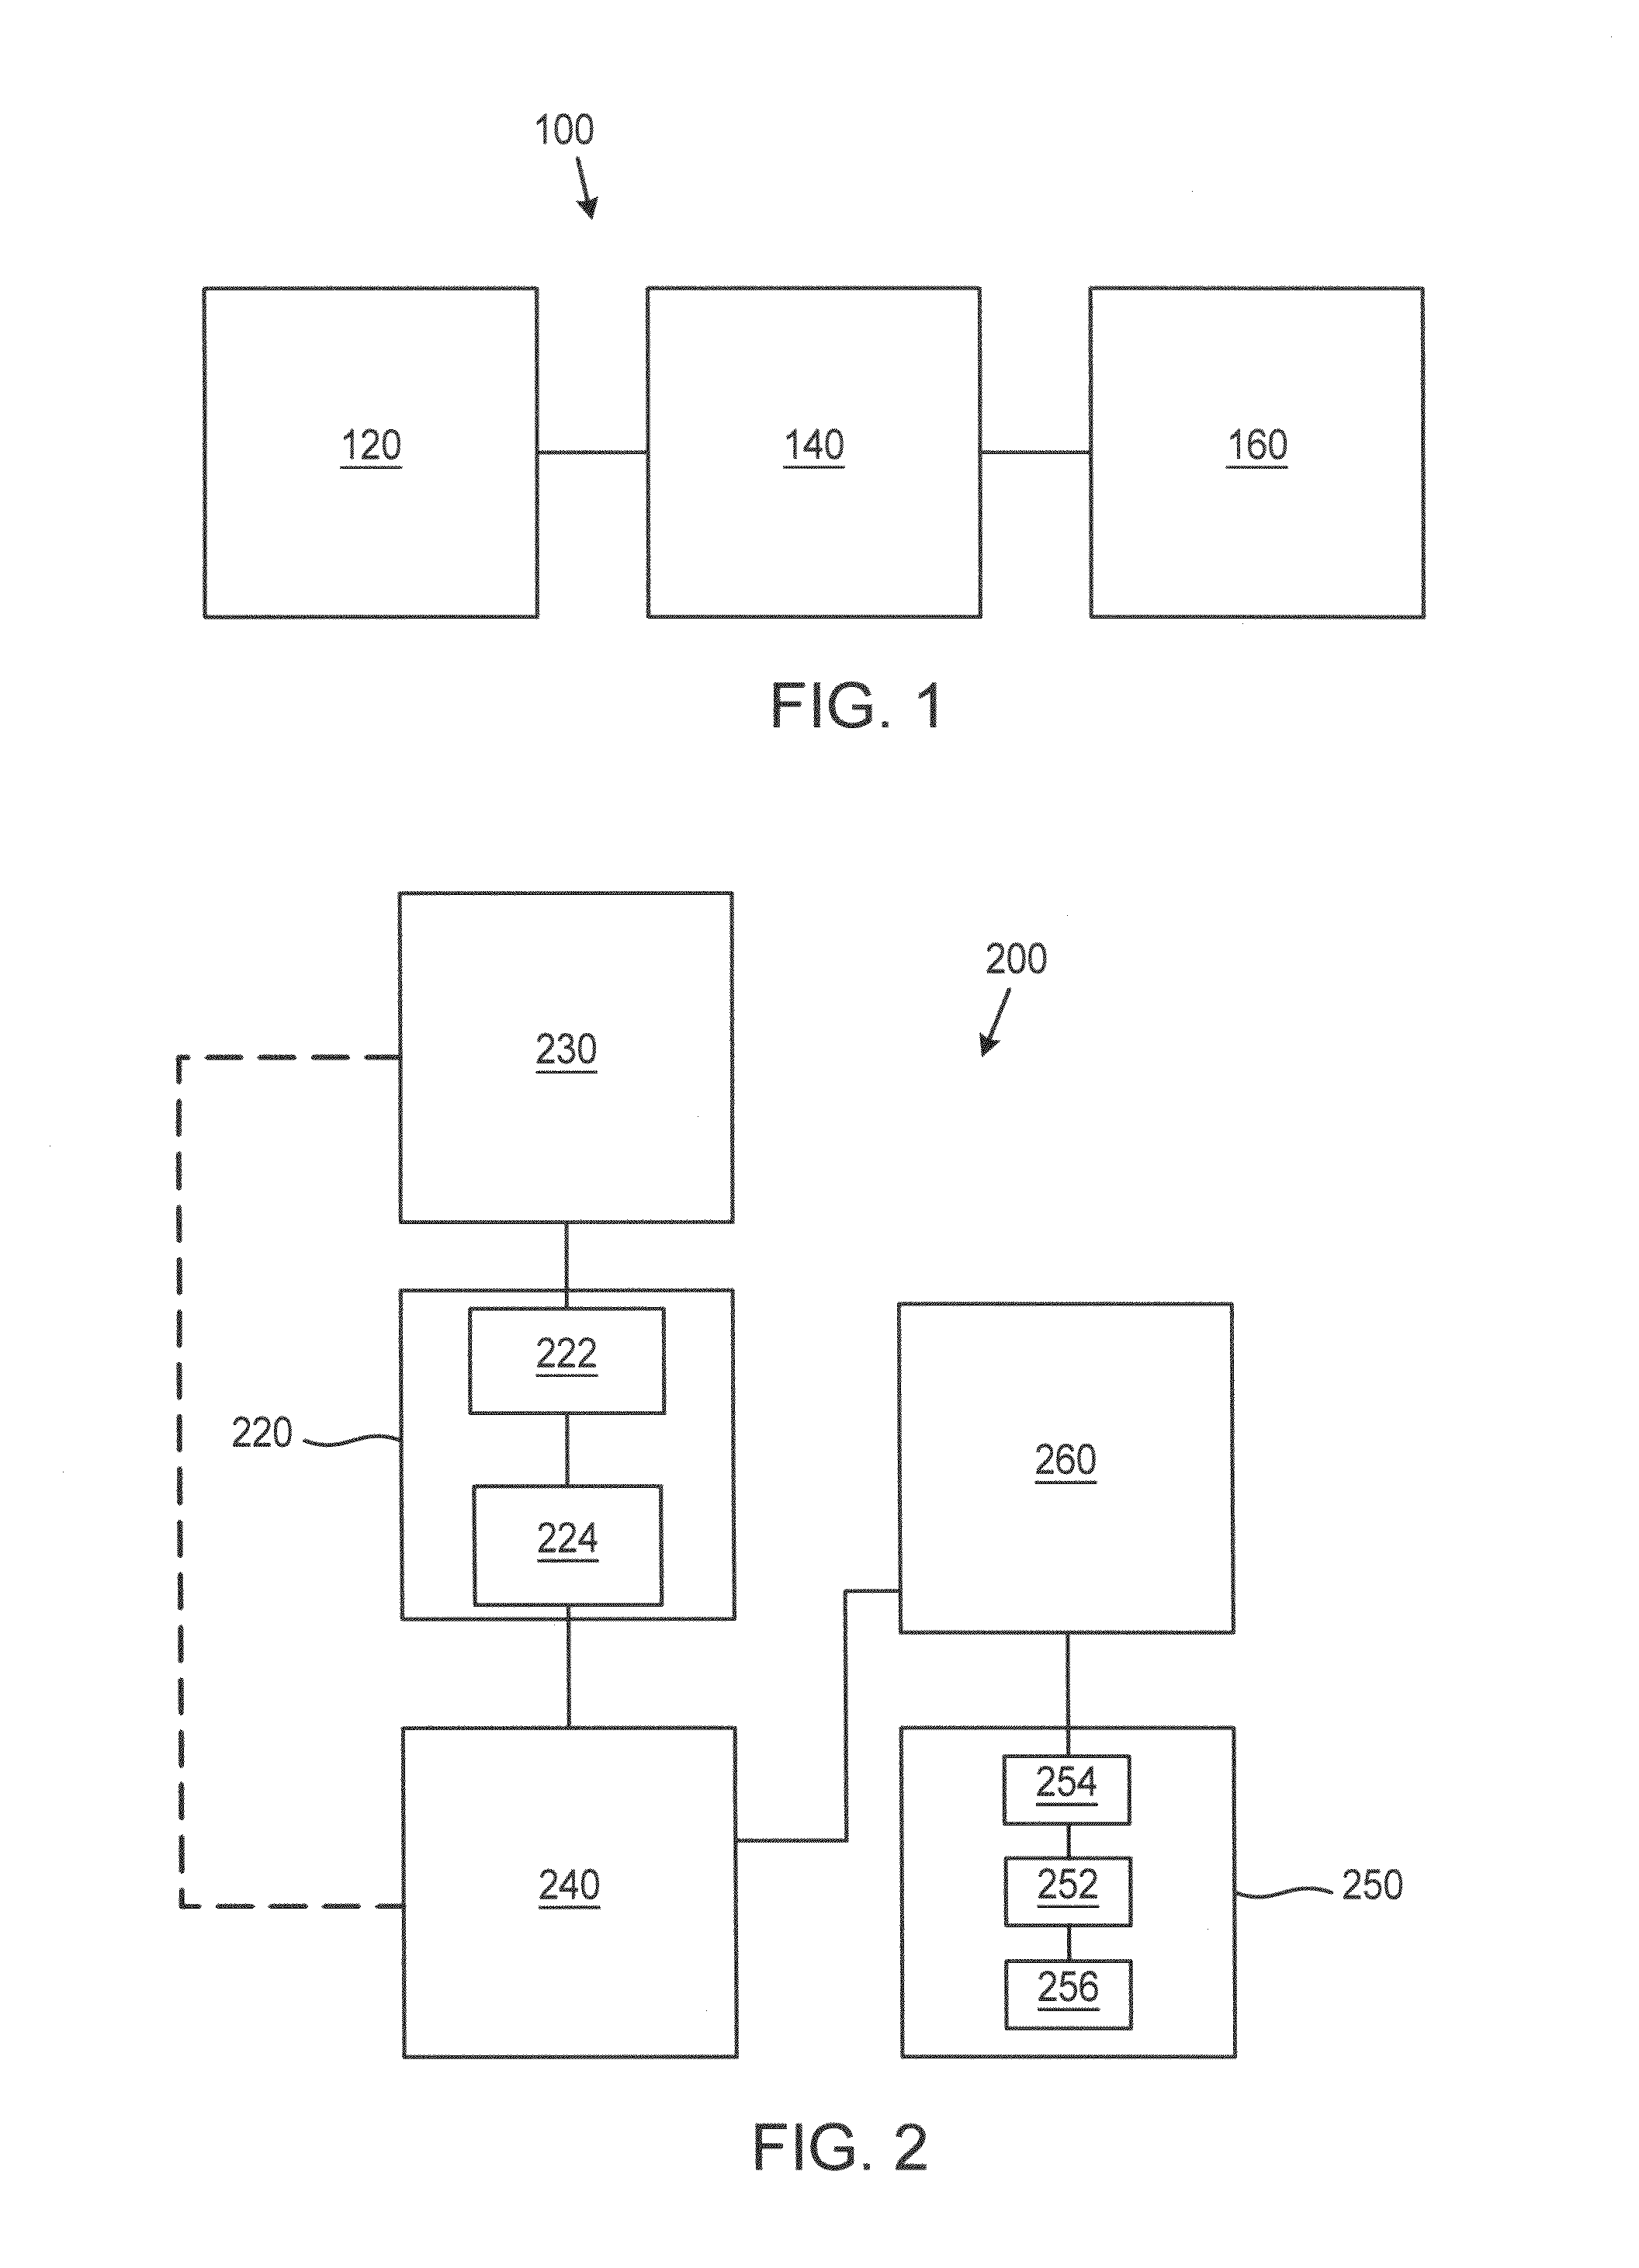 Systems and Methods for tracking and authenticating goods